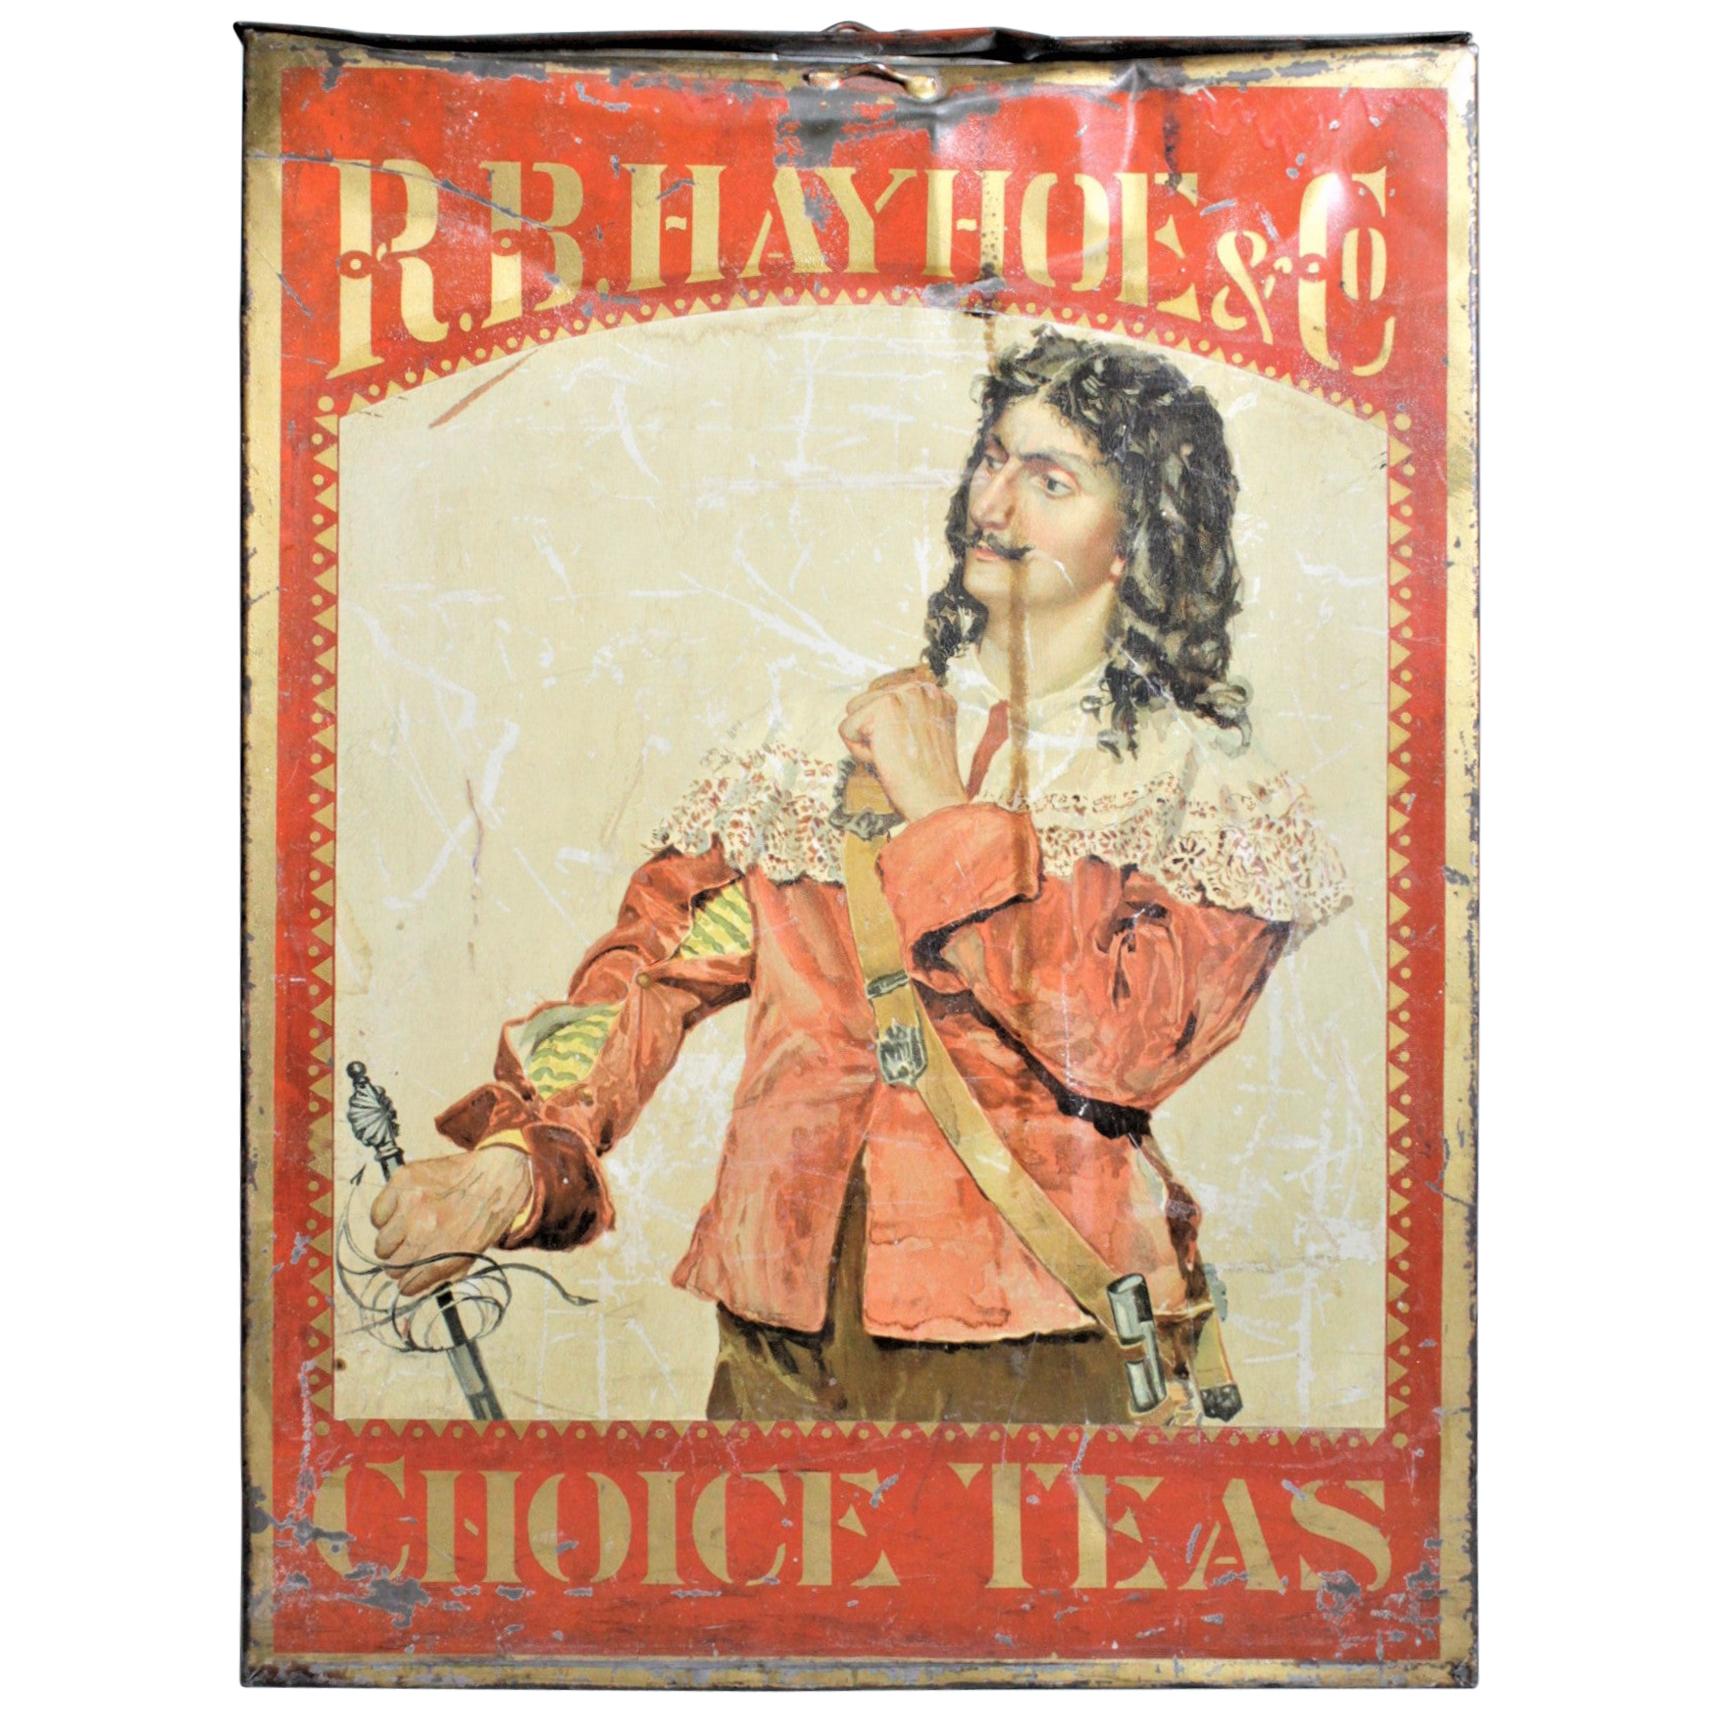 Antique Canadian General Store R.B. Hay Hoe & Co. Tea Advertising Display Tin